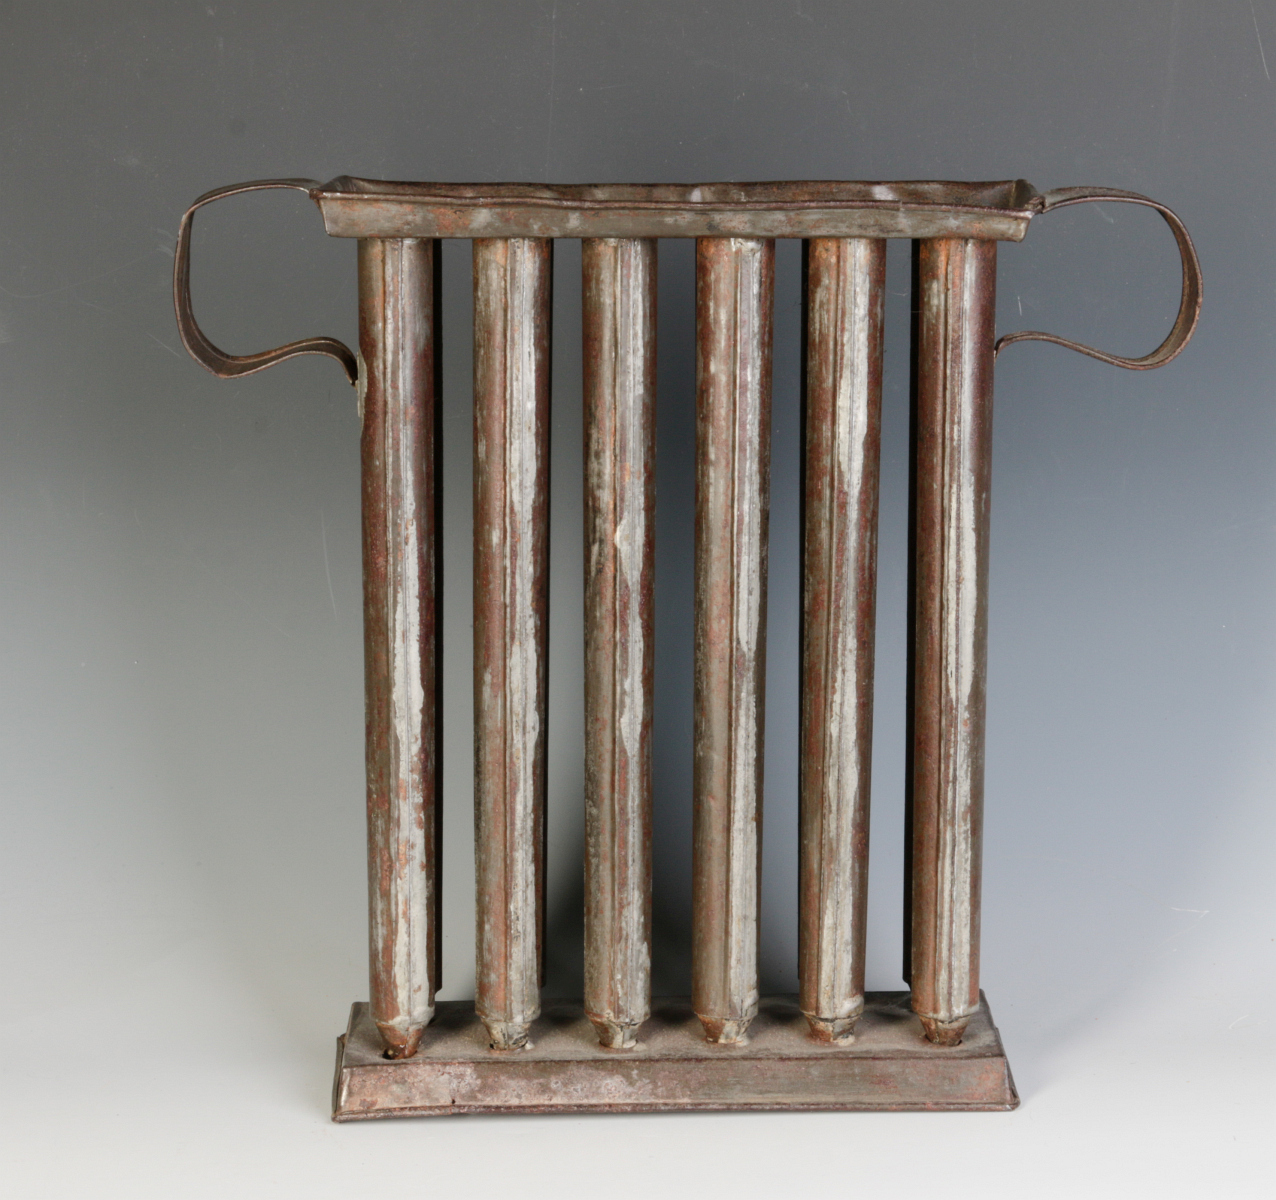 A 19TH CENTURY TIN CANDLE MOLD WITH TWELVE TUBES